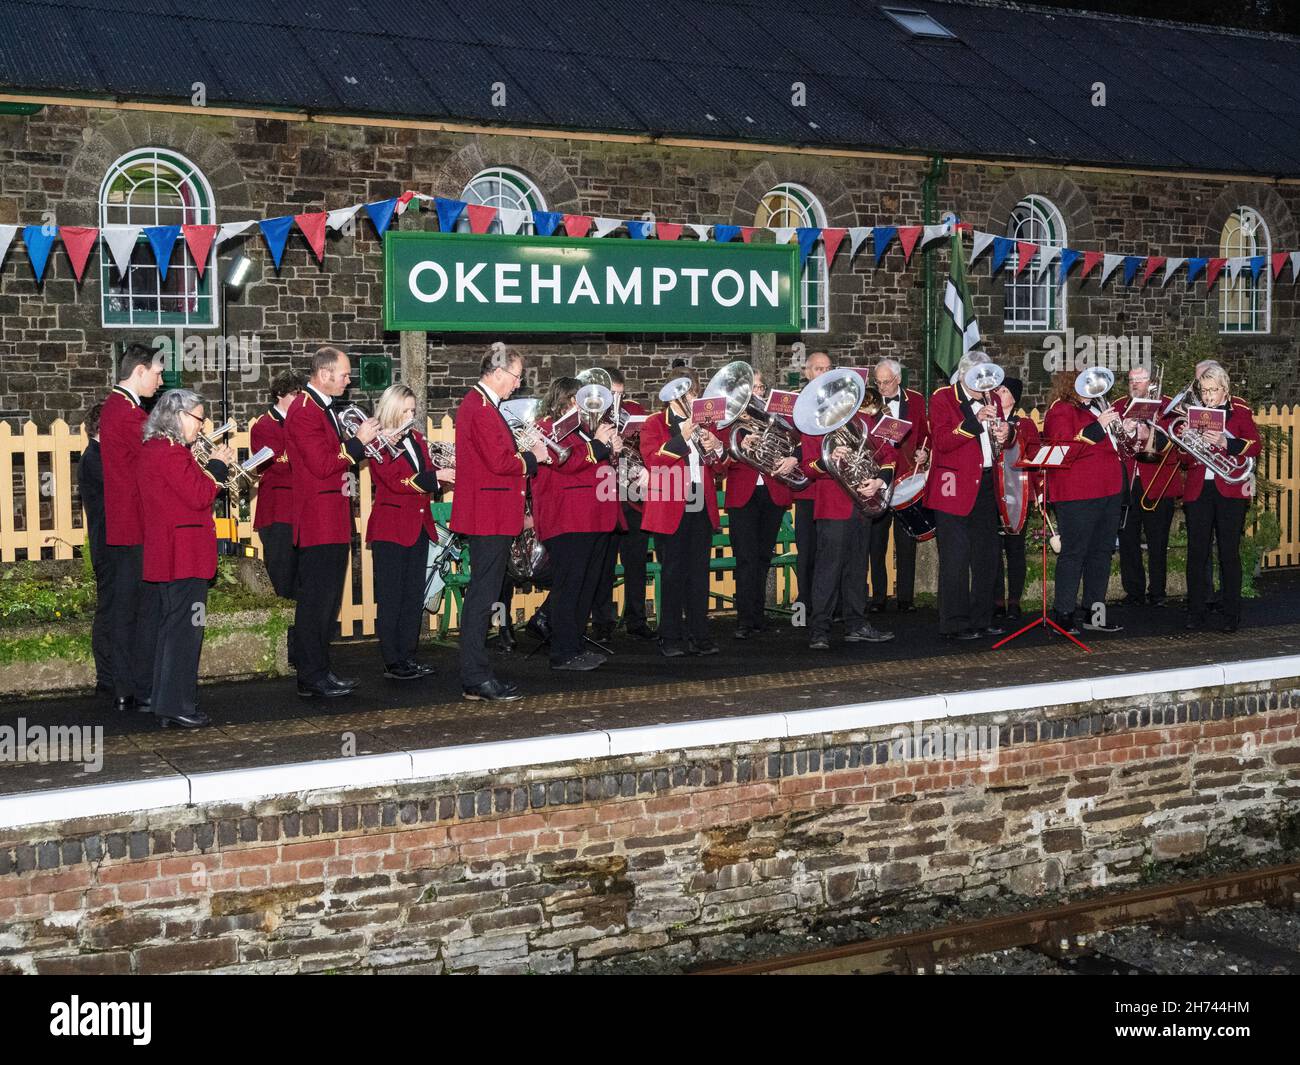 Saturday, 20 November, 2021 - The Hatherleigh Silver Band performs at Okehampton Station to greet the the first Dartmoor Line train.  A regular passenger service to Exeter has been inaugurated after a gap of nearly 50 years.  To renew the way, 11 miles of new track were laid, with 24,000 concrete sleepers, and 29,000 tonnes of balast.  Restoring regular service will improve links for commuters and provide a terminal for visitors to explore Dartmoor National Park.  It will boost boost local businesses, the tourism sector and provide better access to work and education for locals. Stock Photo